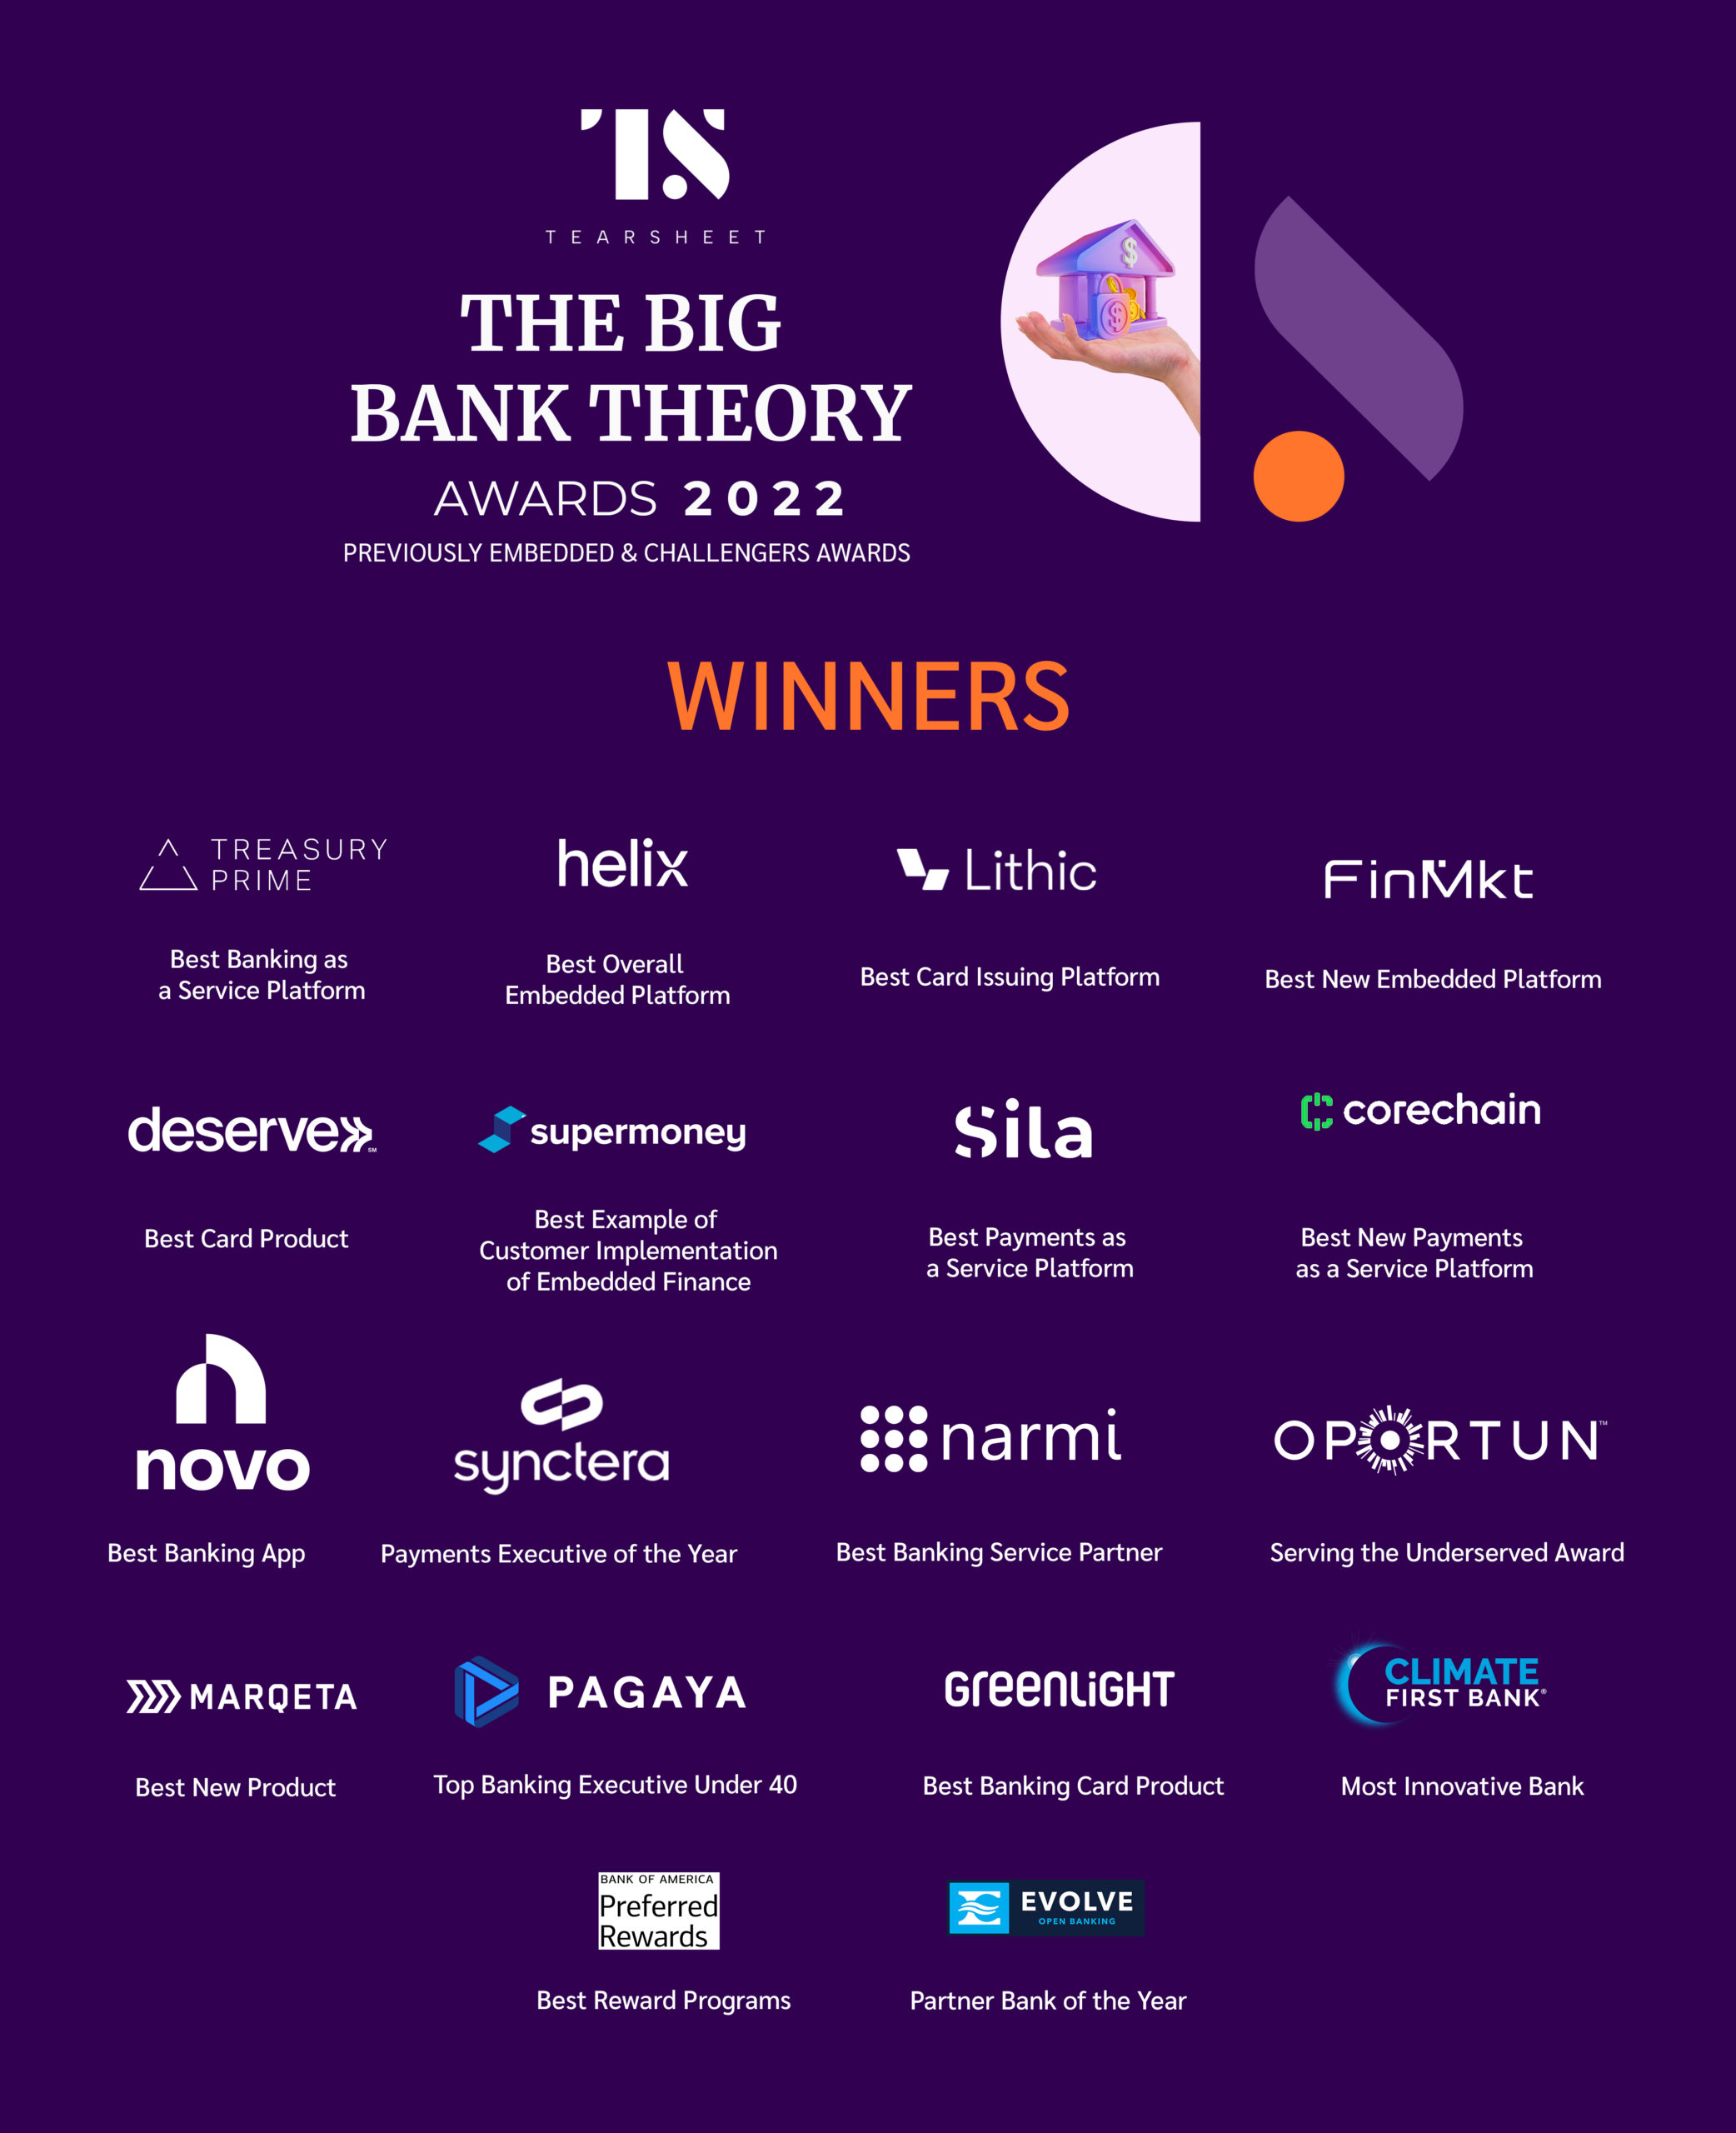 2022 The Big Bank Theory Award winners included Treasury Prime, helix, Lithic, FinMkt, deserve, super money, Sila, core chain, novo, synctera, Naomi, and oprtun